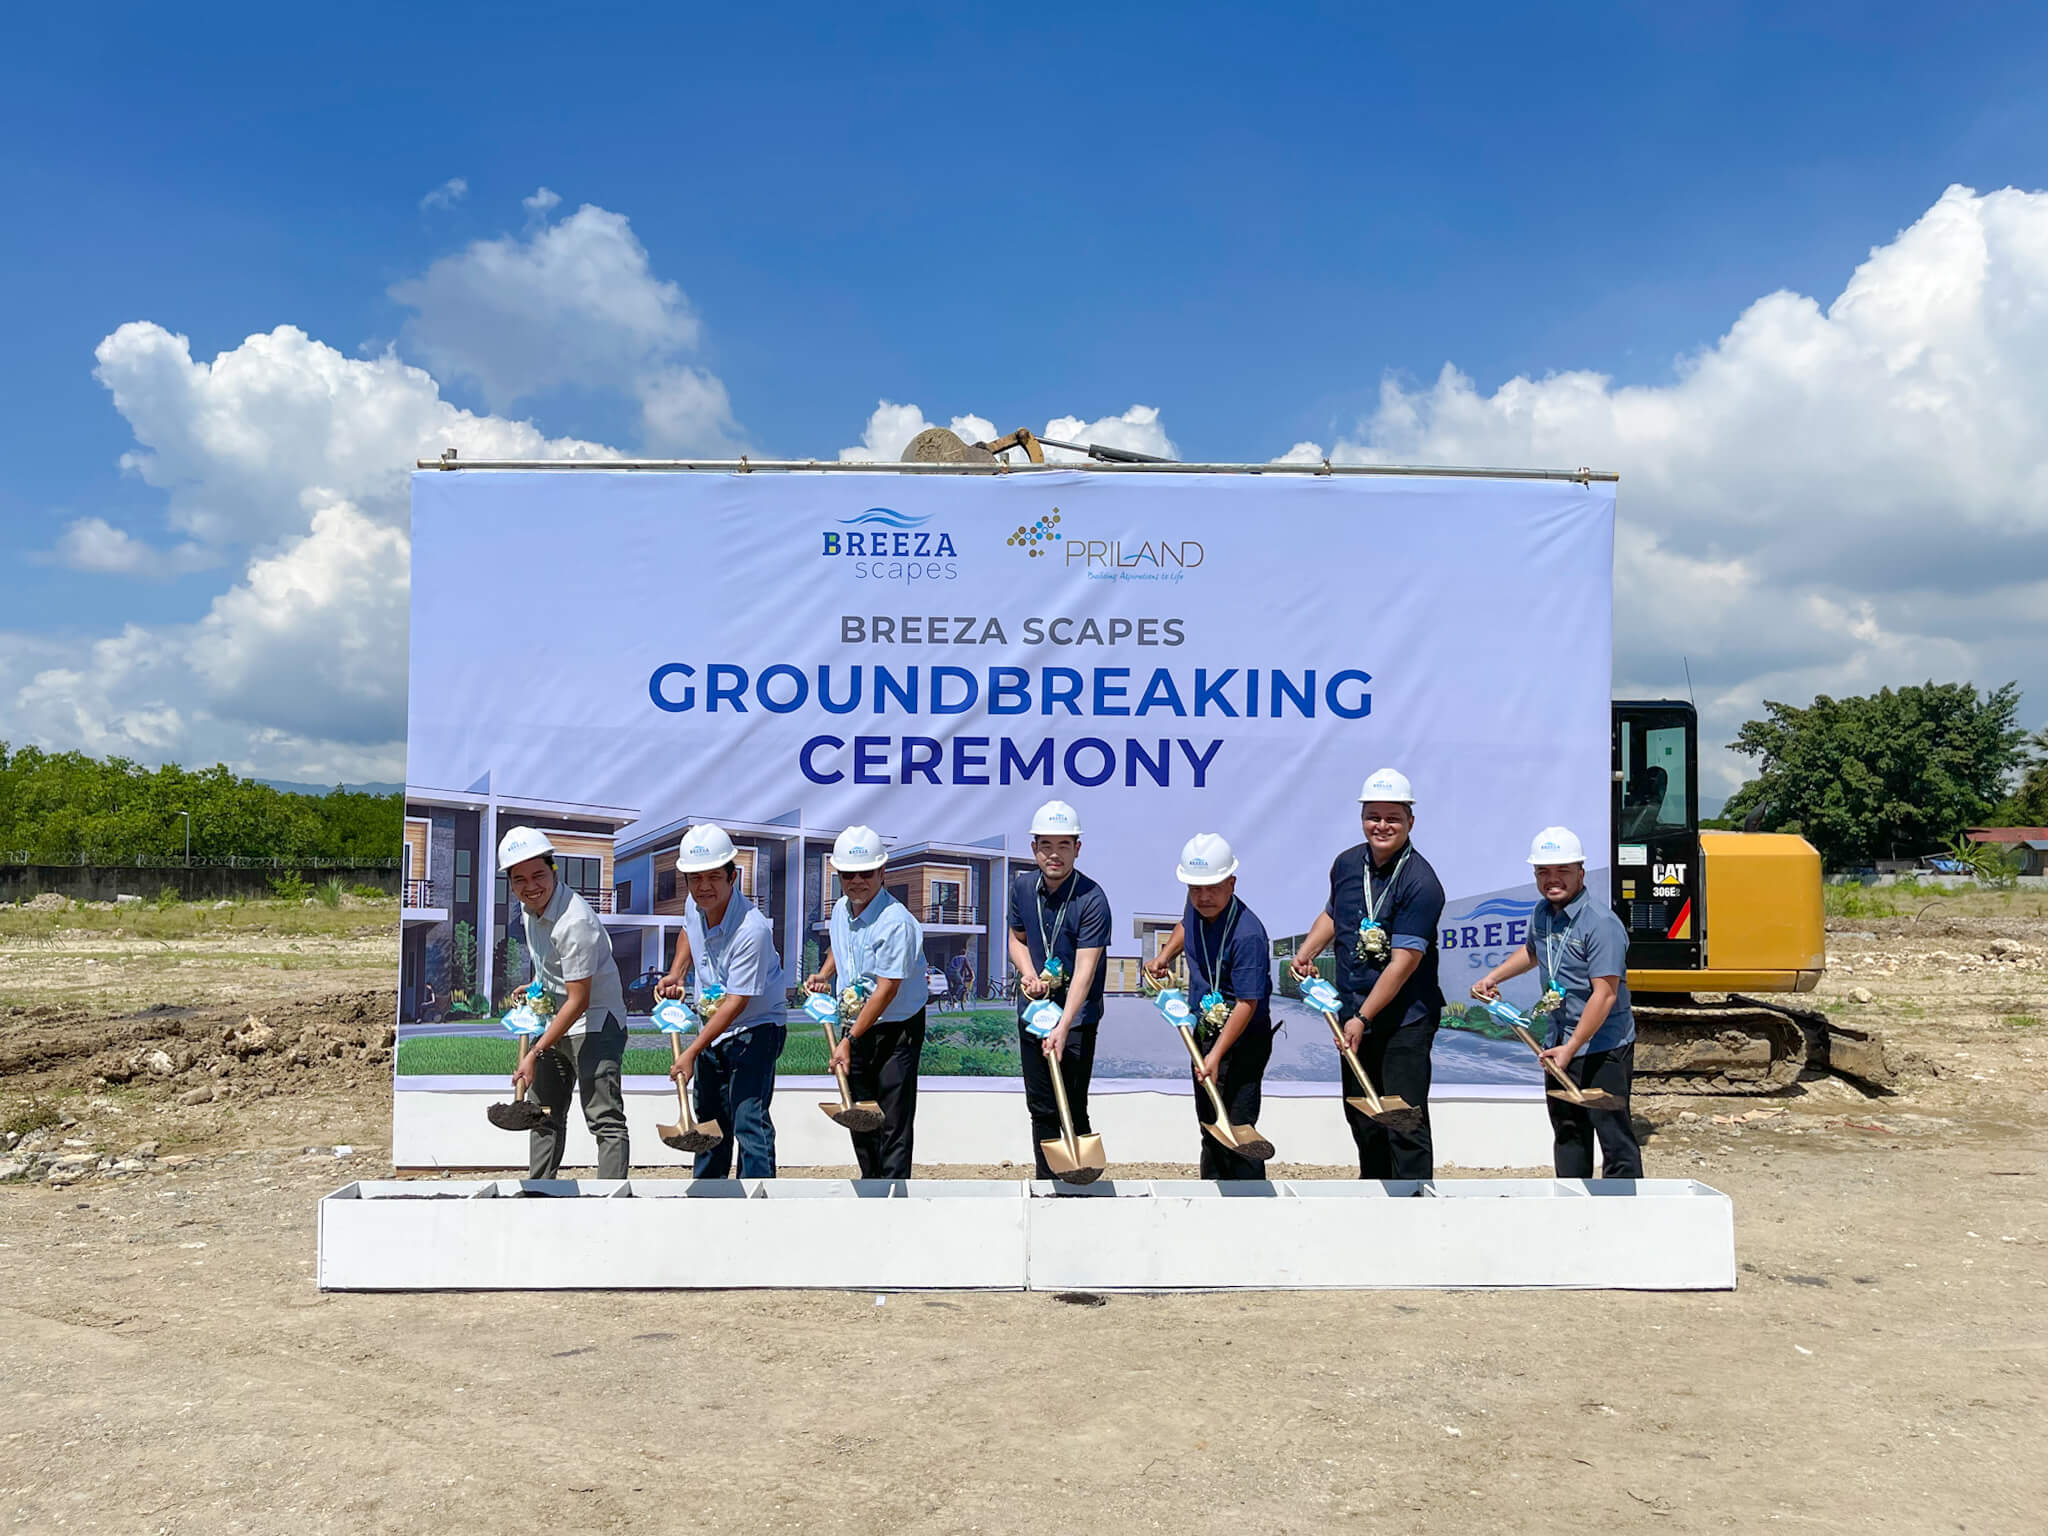 GROUNDBREAKING. Mark Anthony Inario, Planning & Design Manager; Engr. Arturo Flores, Technical Manager; Engr. Roy Vincent Lumayag, Vice President for Technical; Ramon Carlo Yap, President; Marcelino Relampagos, Chief Operating Officer;  Dudes Tuanquin, Vice President for Sales & Marketing; Irvin Paul Pastoriza, Sales Manager.